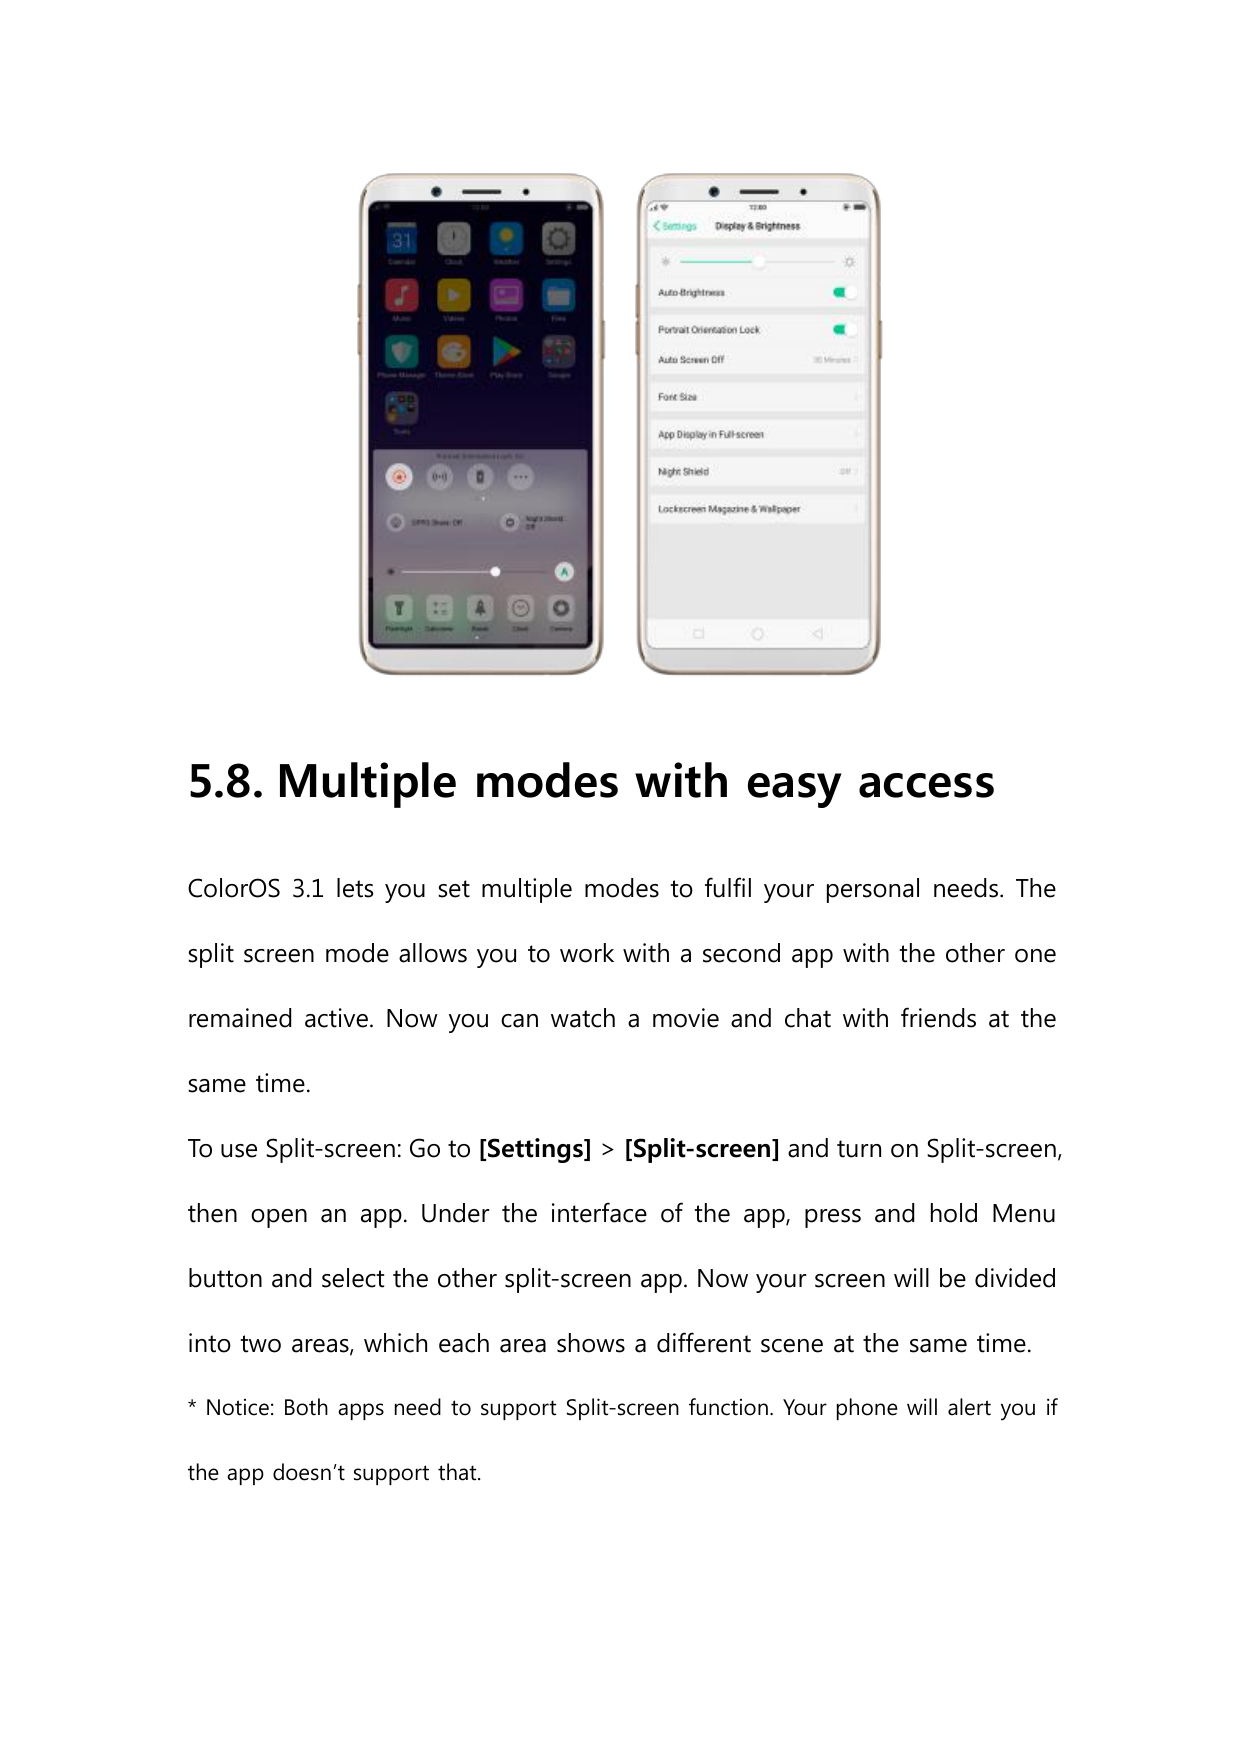 5.8. Multiple modes with easy accessColorOS 3.1 lets you set multiple modes to fulfil your personal needs. Thesplit screen mode 